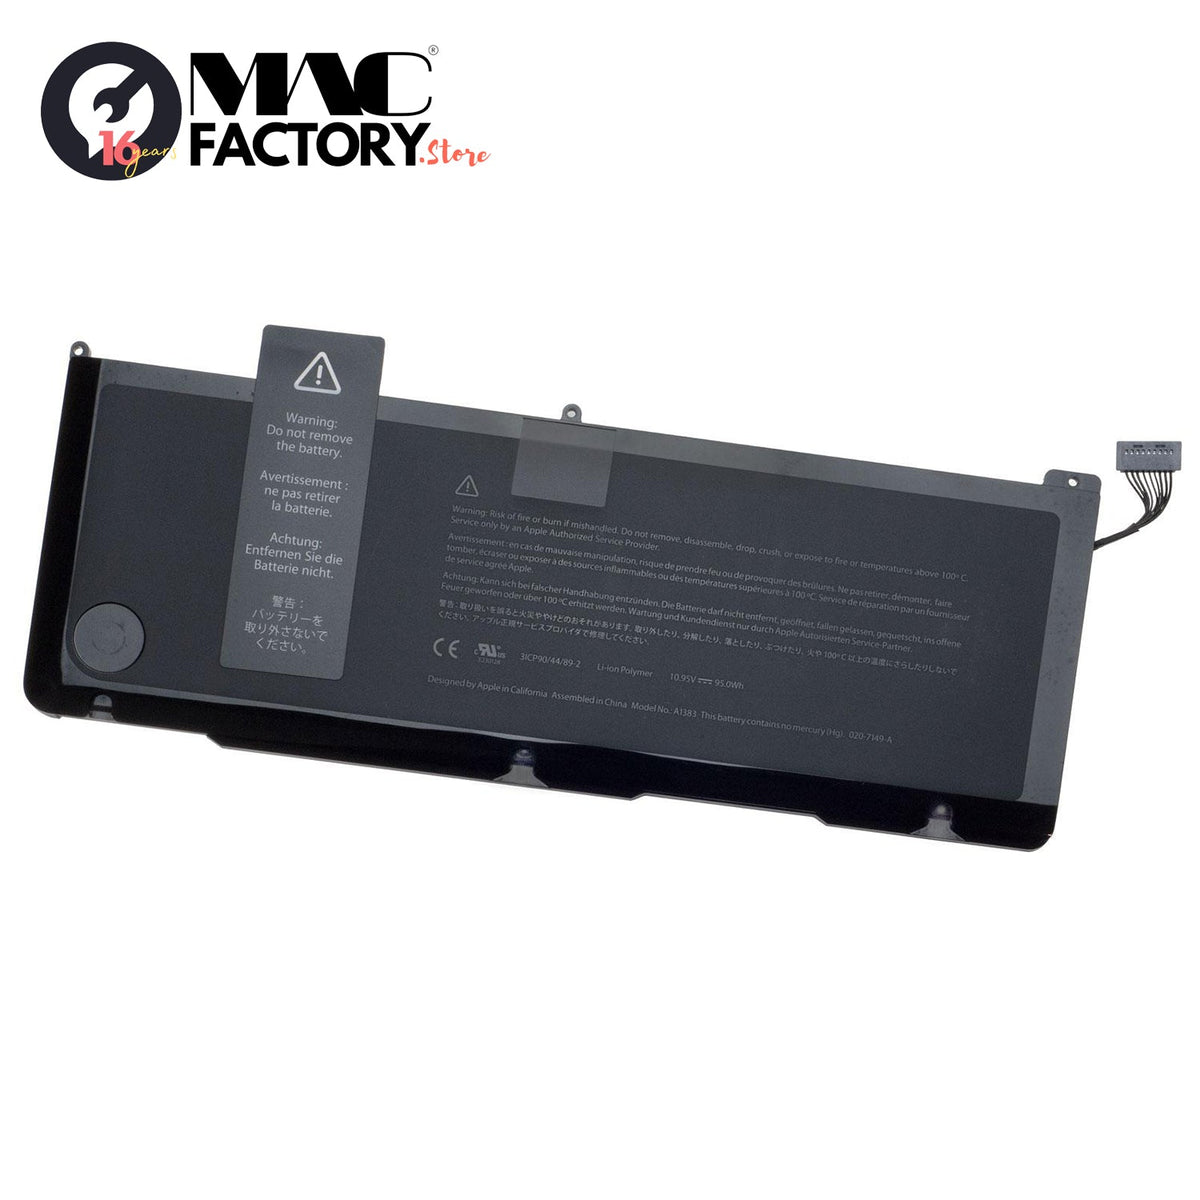 Avance A1383 10.95V/95WH 8700MAH Battery for Apple MacBook Pro Unibody 17" A1297 EARLY & LATE 2011